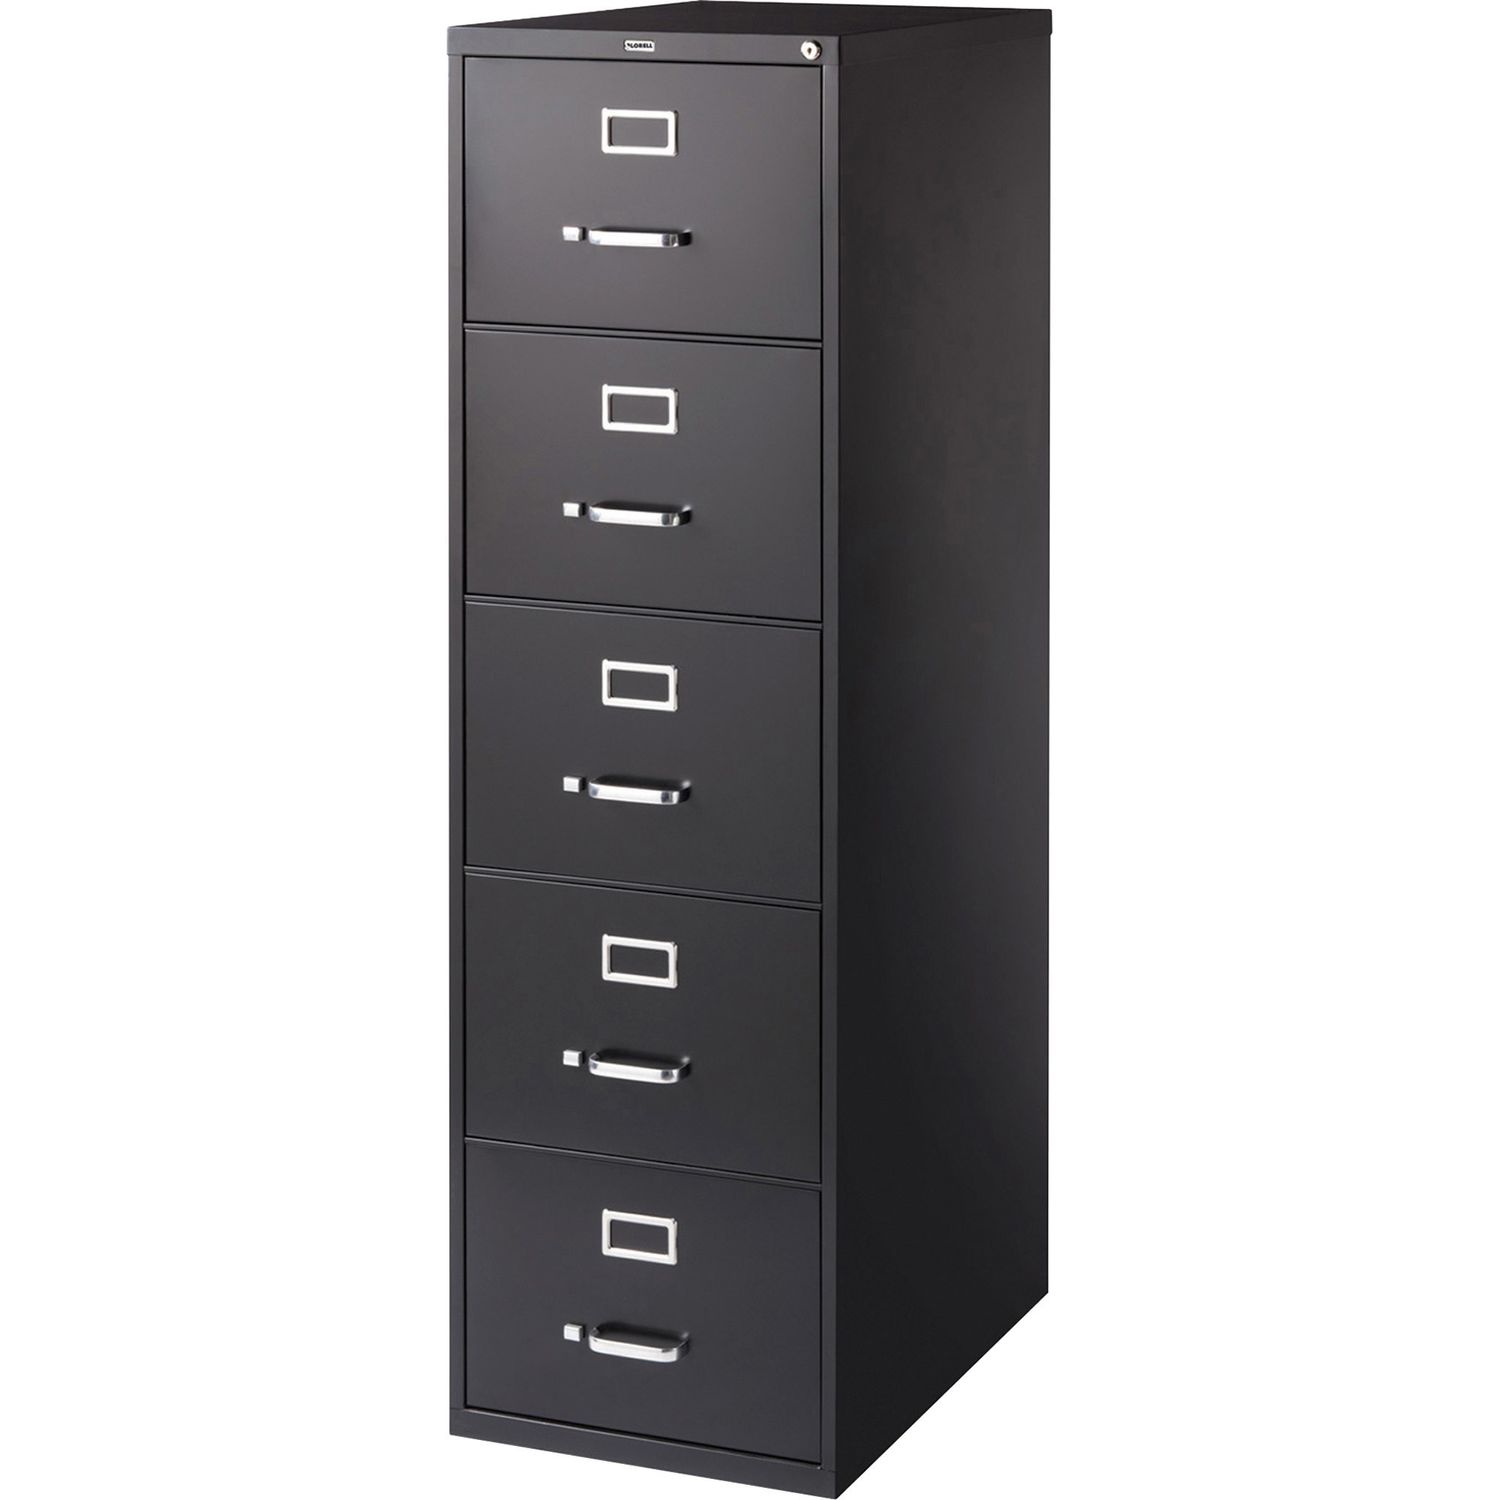 Commercial Grade Vertical File Cabinet - 5-Drawer 18" x 26.5" x 61", 5 x Drawer(s) for File, Legal, Vertical, Heavy Duty, Security Lock, Ball-bearing Suspension, Black, Steel, Recycled